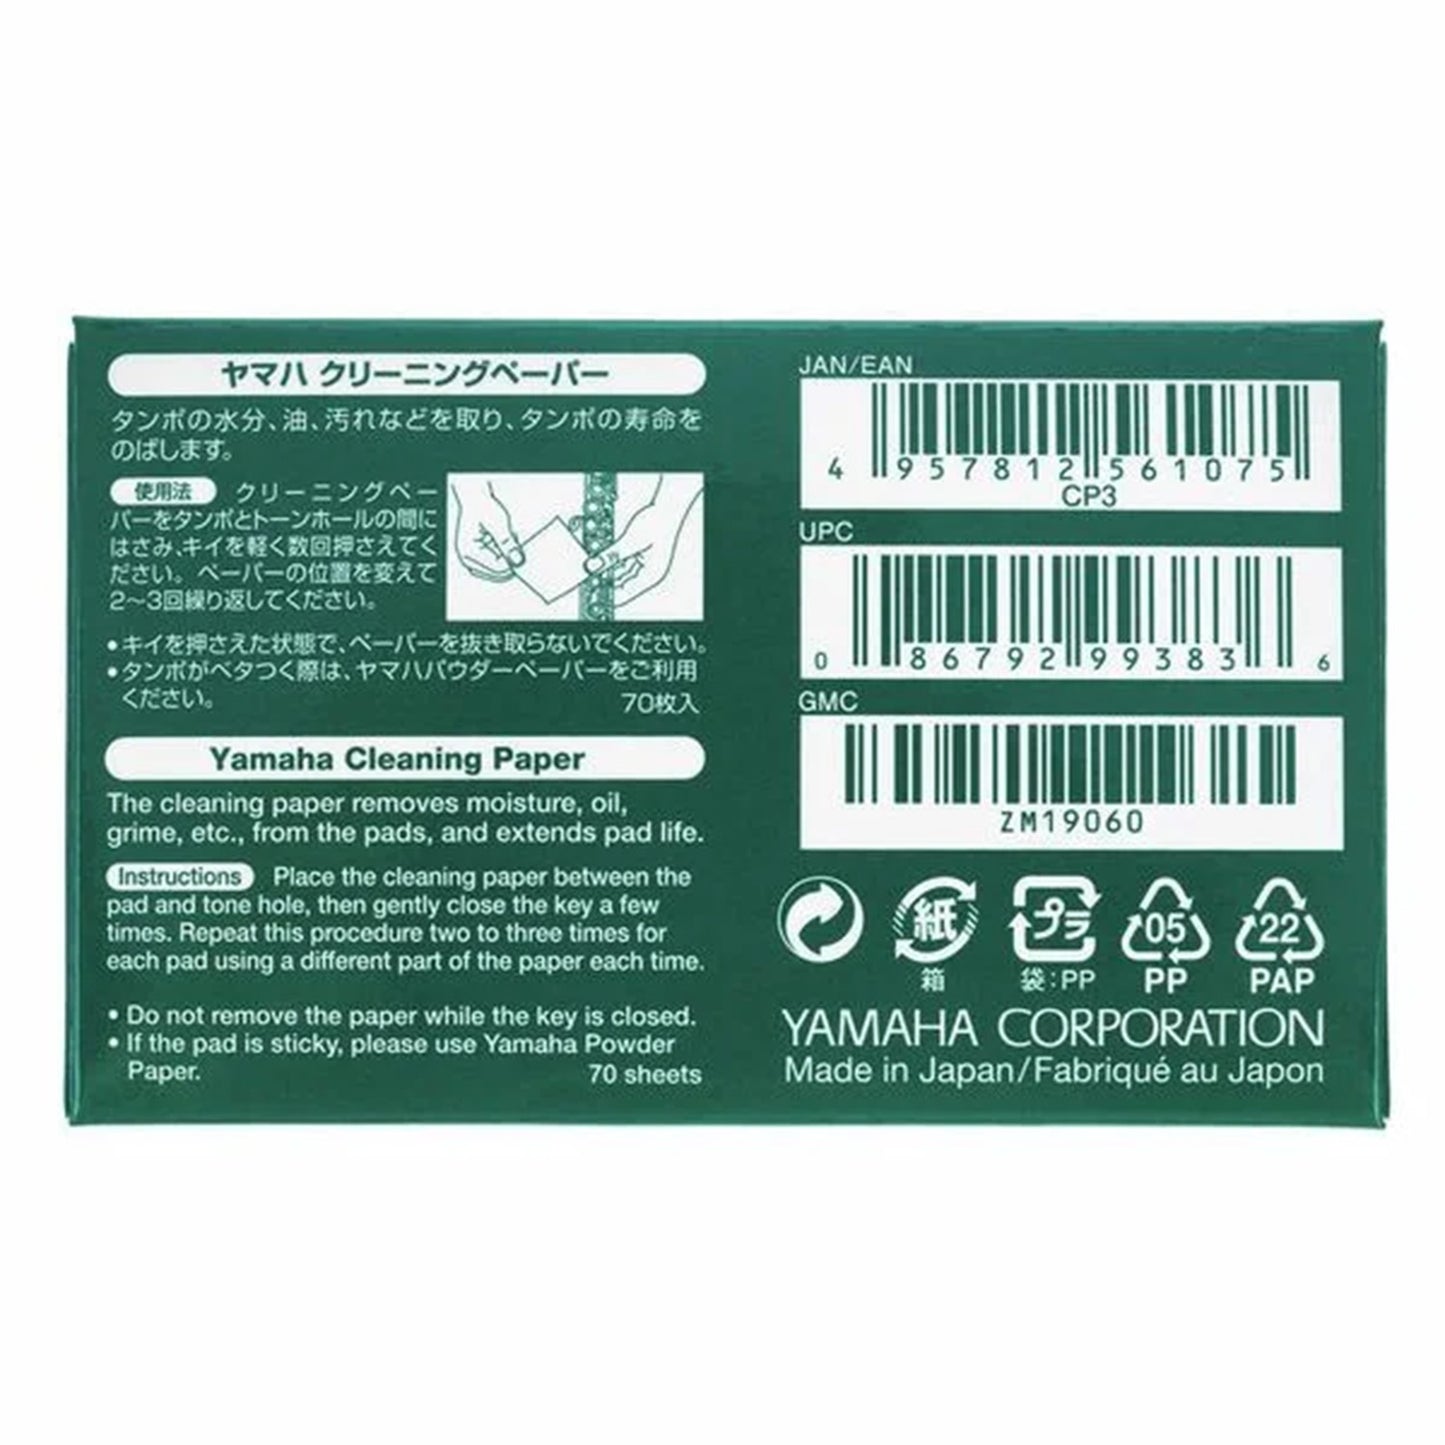 rear view of box of Yamaha pad cleaning papers, with writing in japanese and English, with barcodes and recycling logos